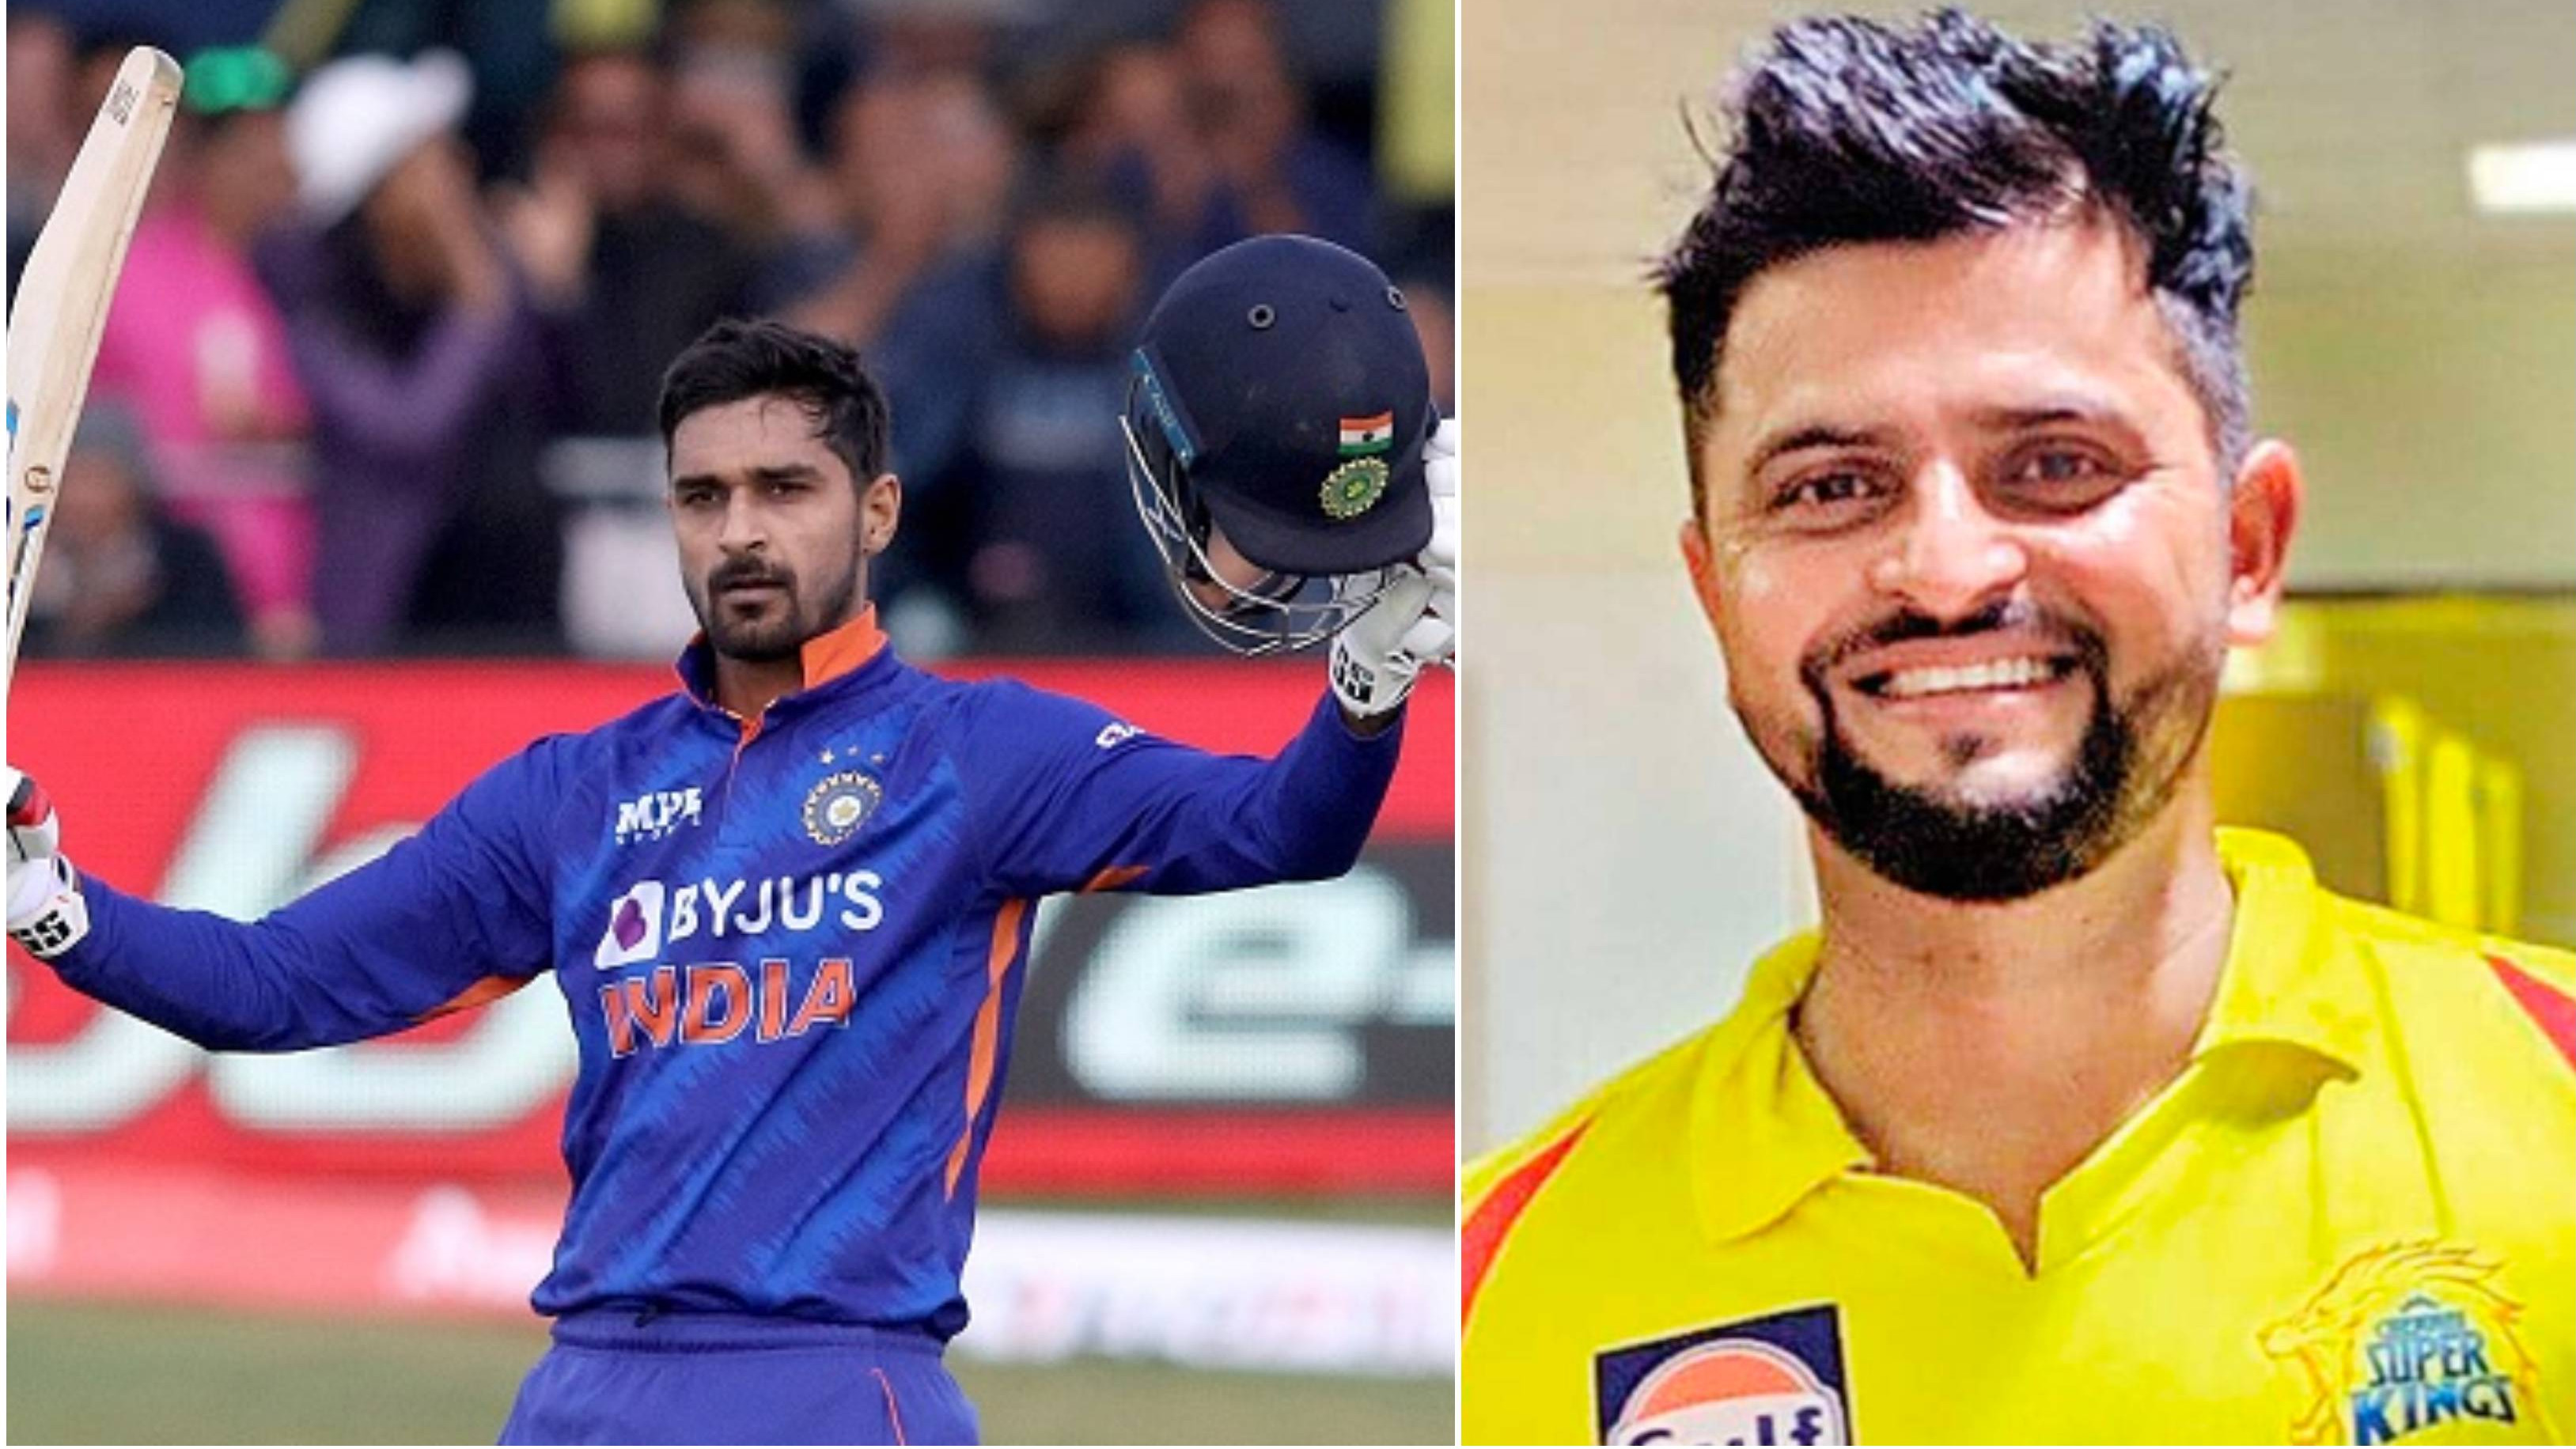 “I think Deepak Hooda could bring that factor,” Raina bats for all-rounder’s inclusion in Indian team ahead of World Cup